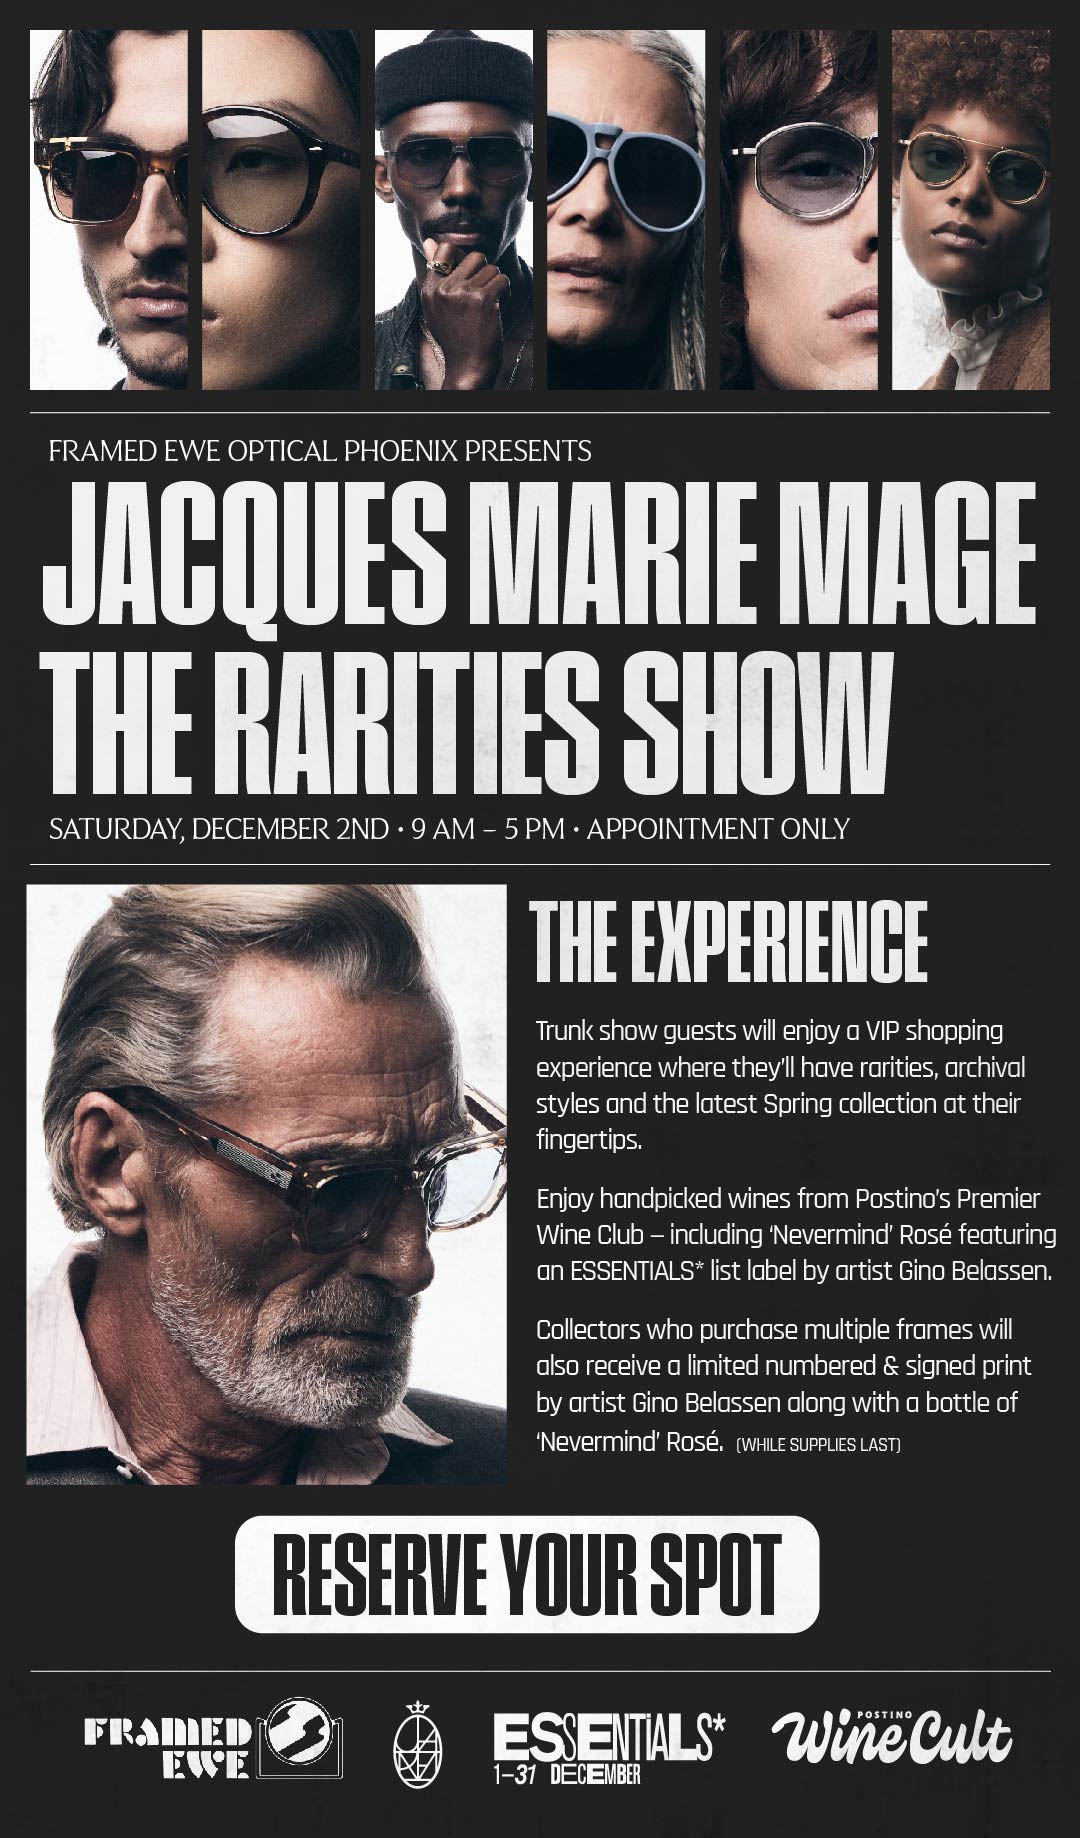 Jacques Marie Mage Trunk Show Invite DEC 2nd